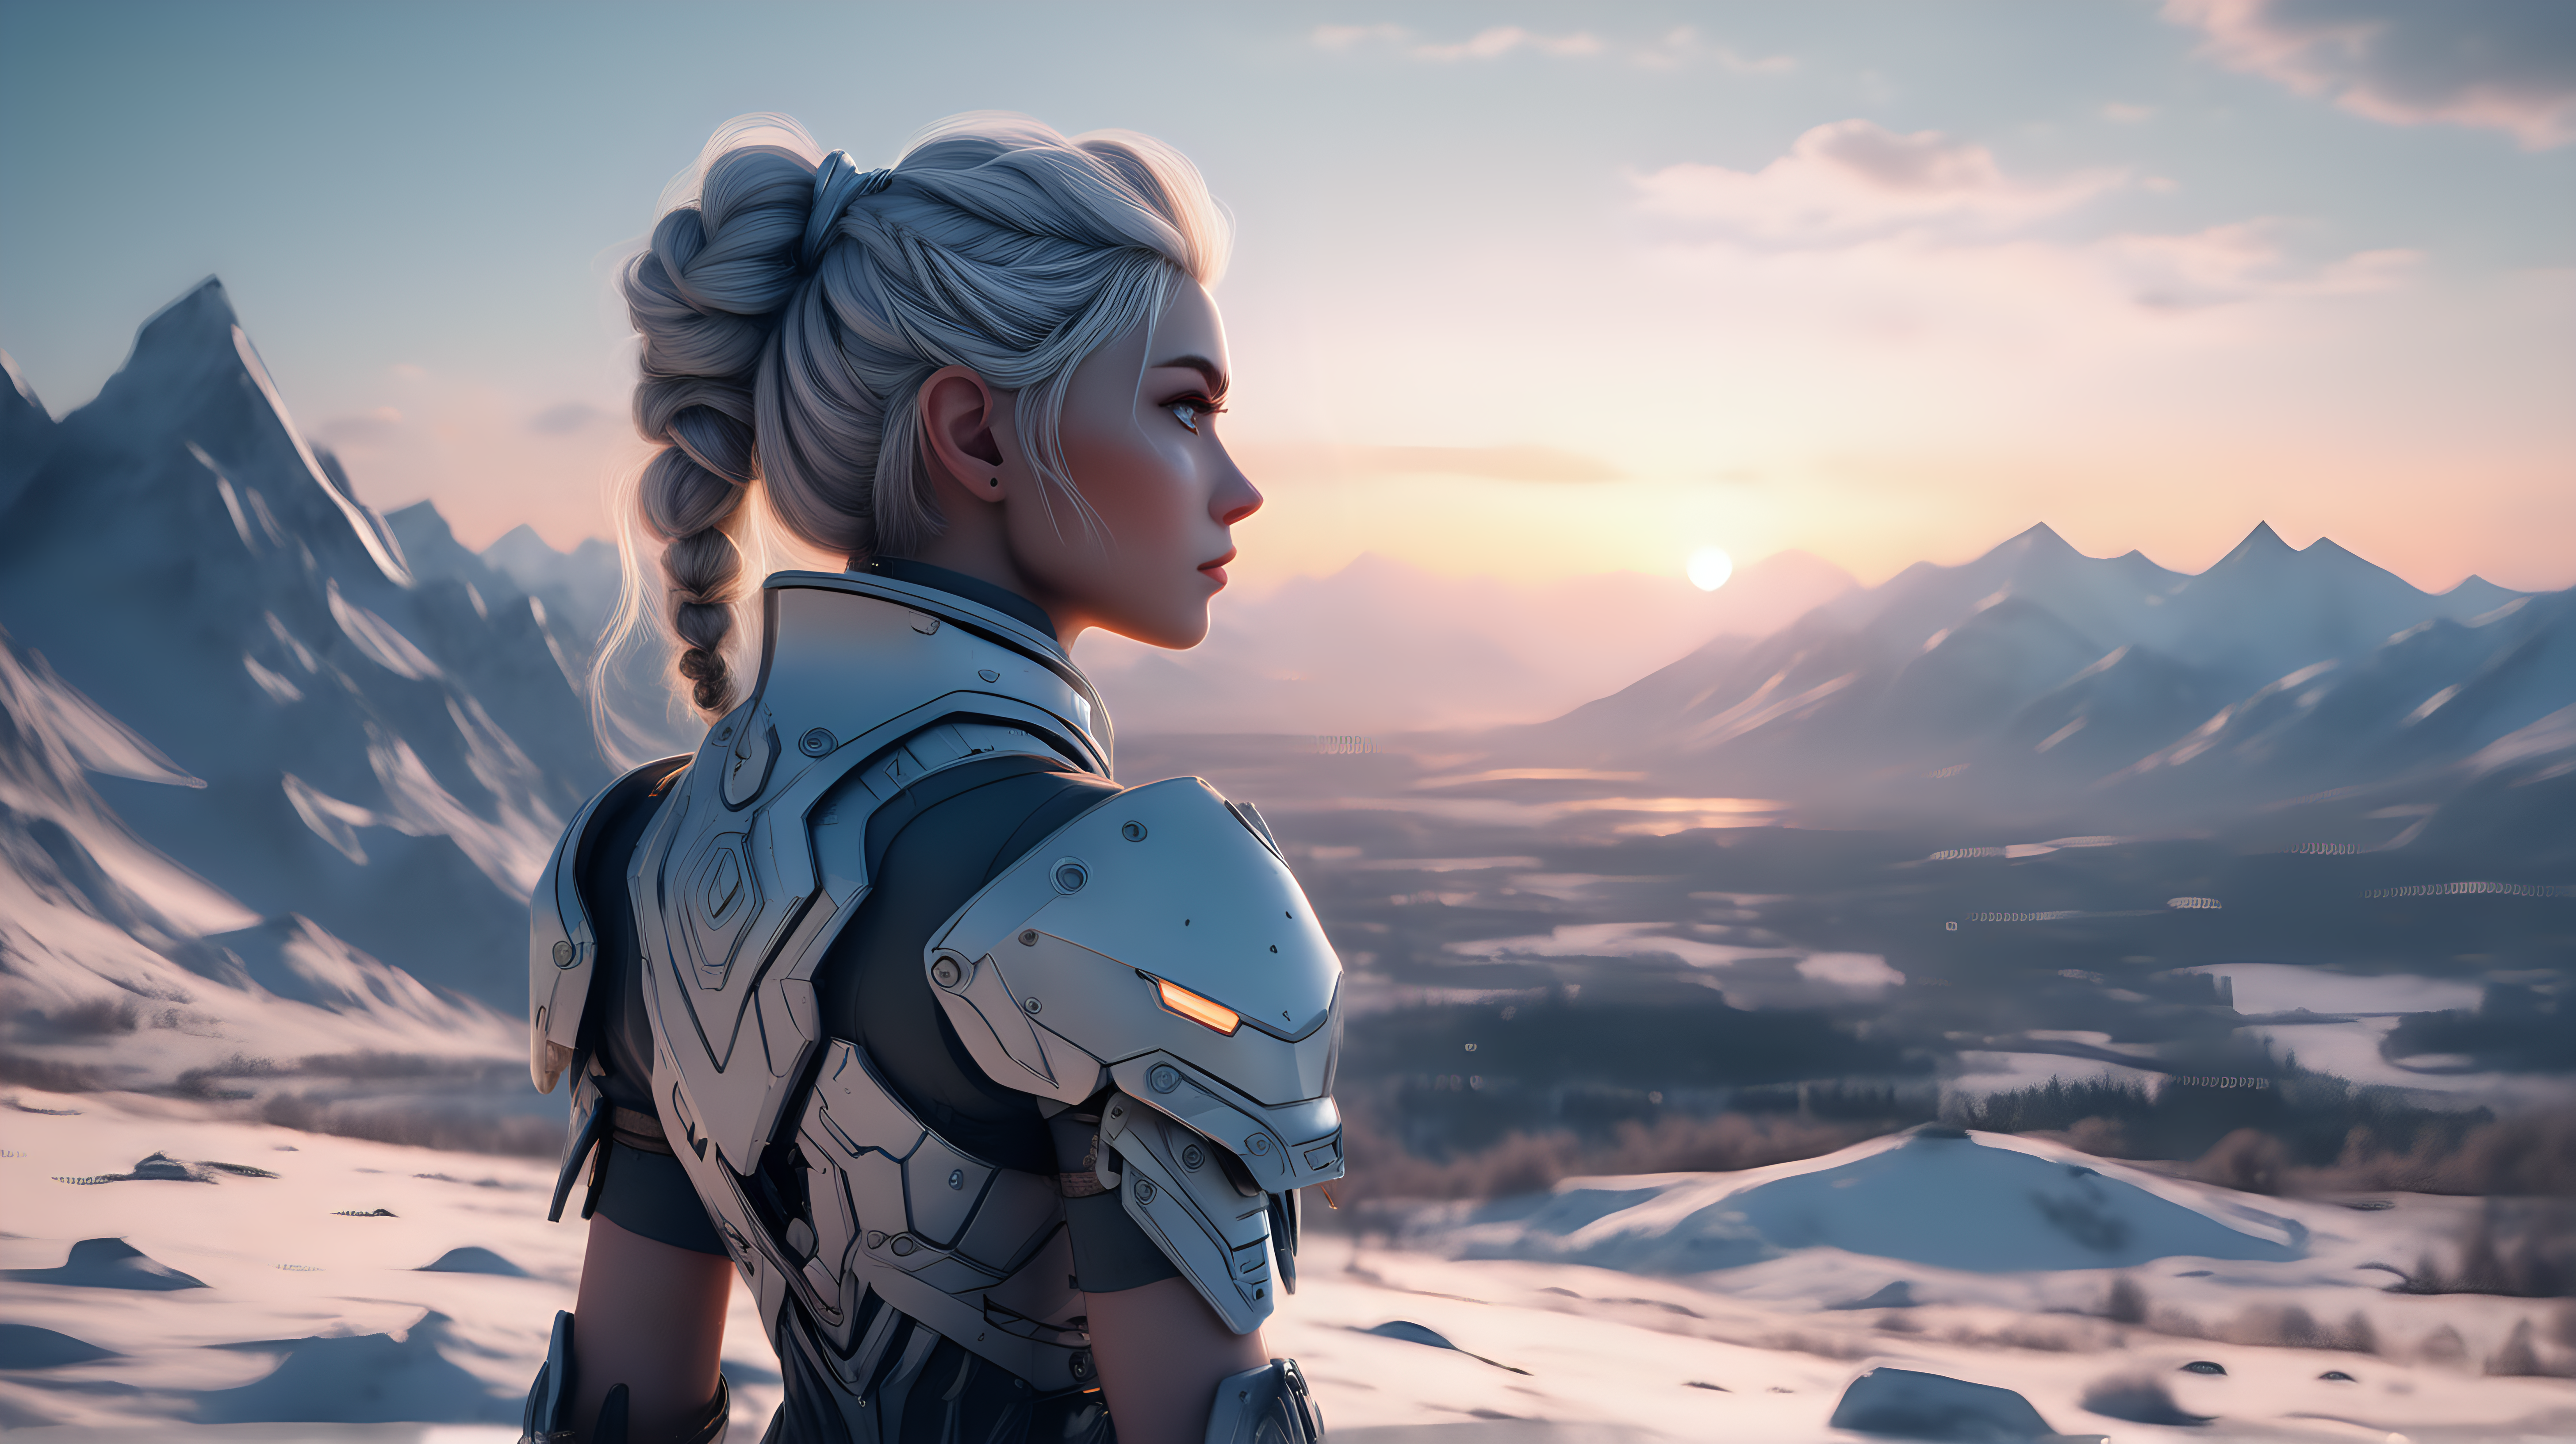 the photo is taken in snowy landscape with mountains in the distance sunset. a cyborg cute valkirie looking out at sprawling landscape . Sharp focus. A ultrarealistic perfect example of cinematic shot. Use muted colors to add to the scene.